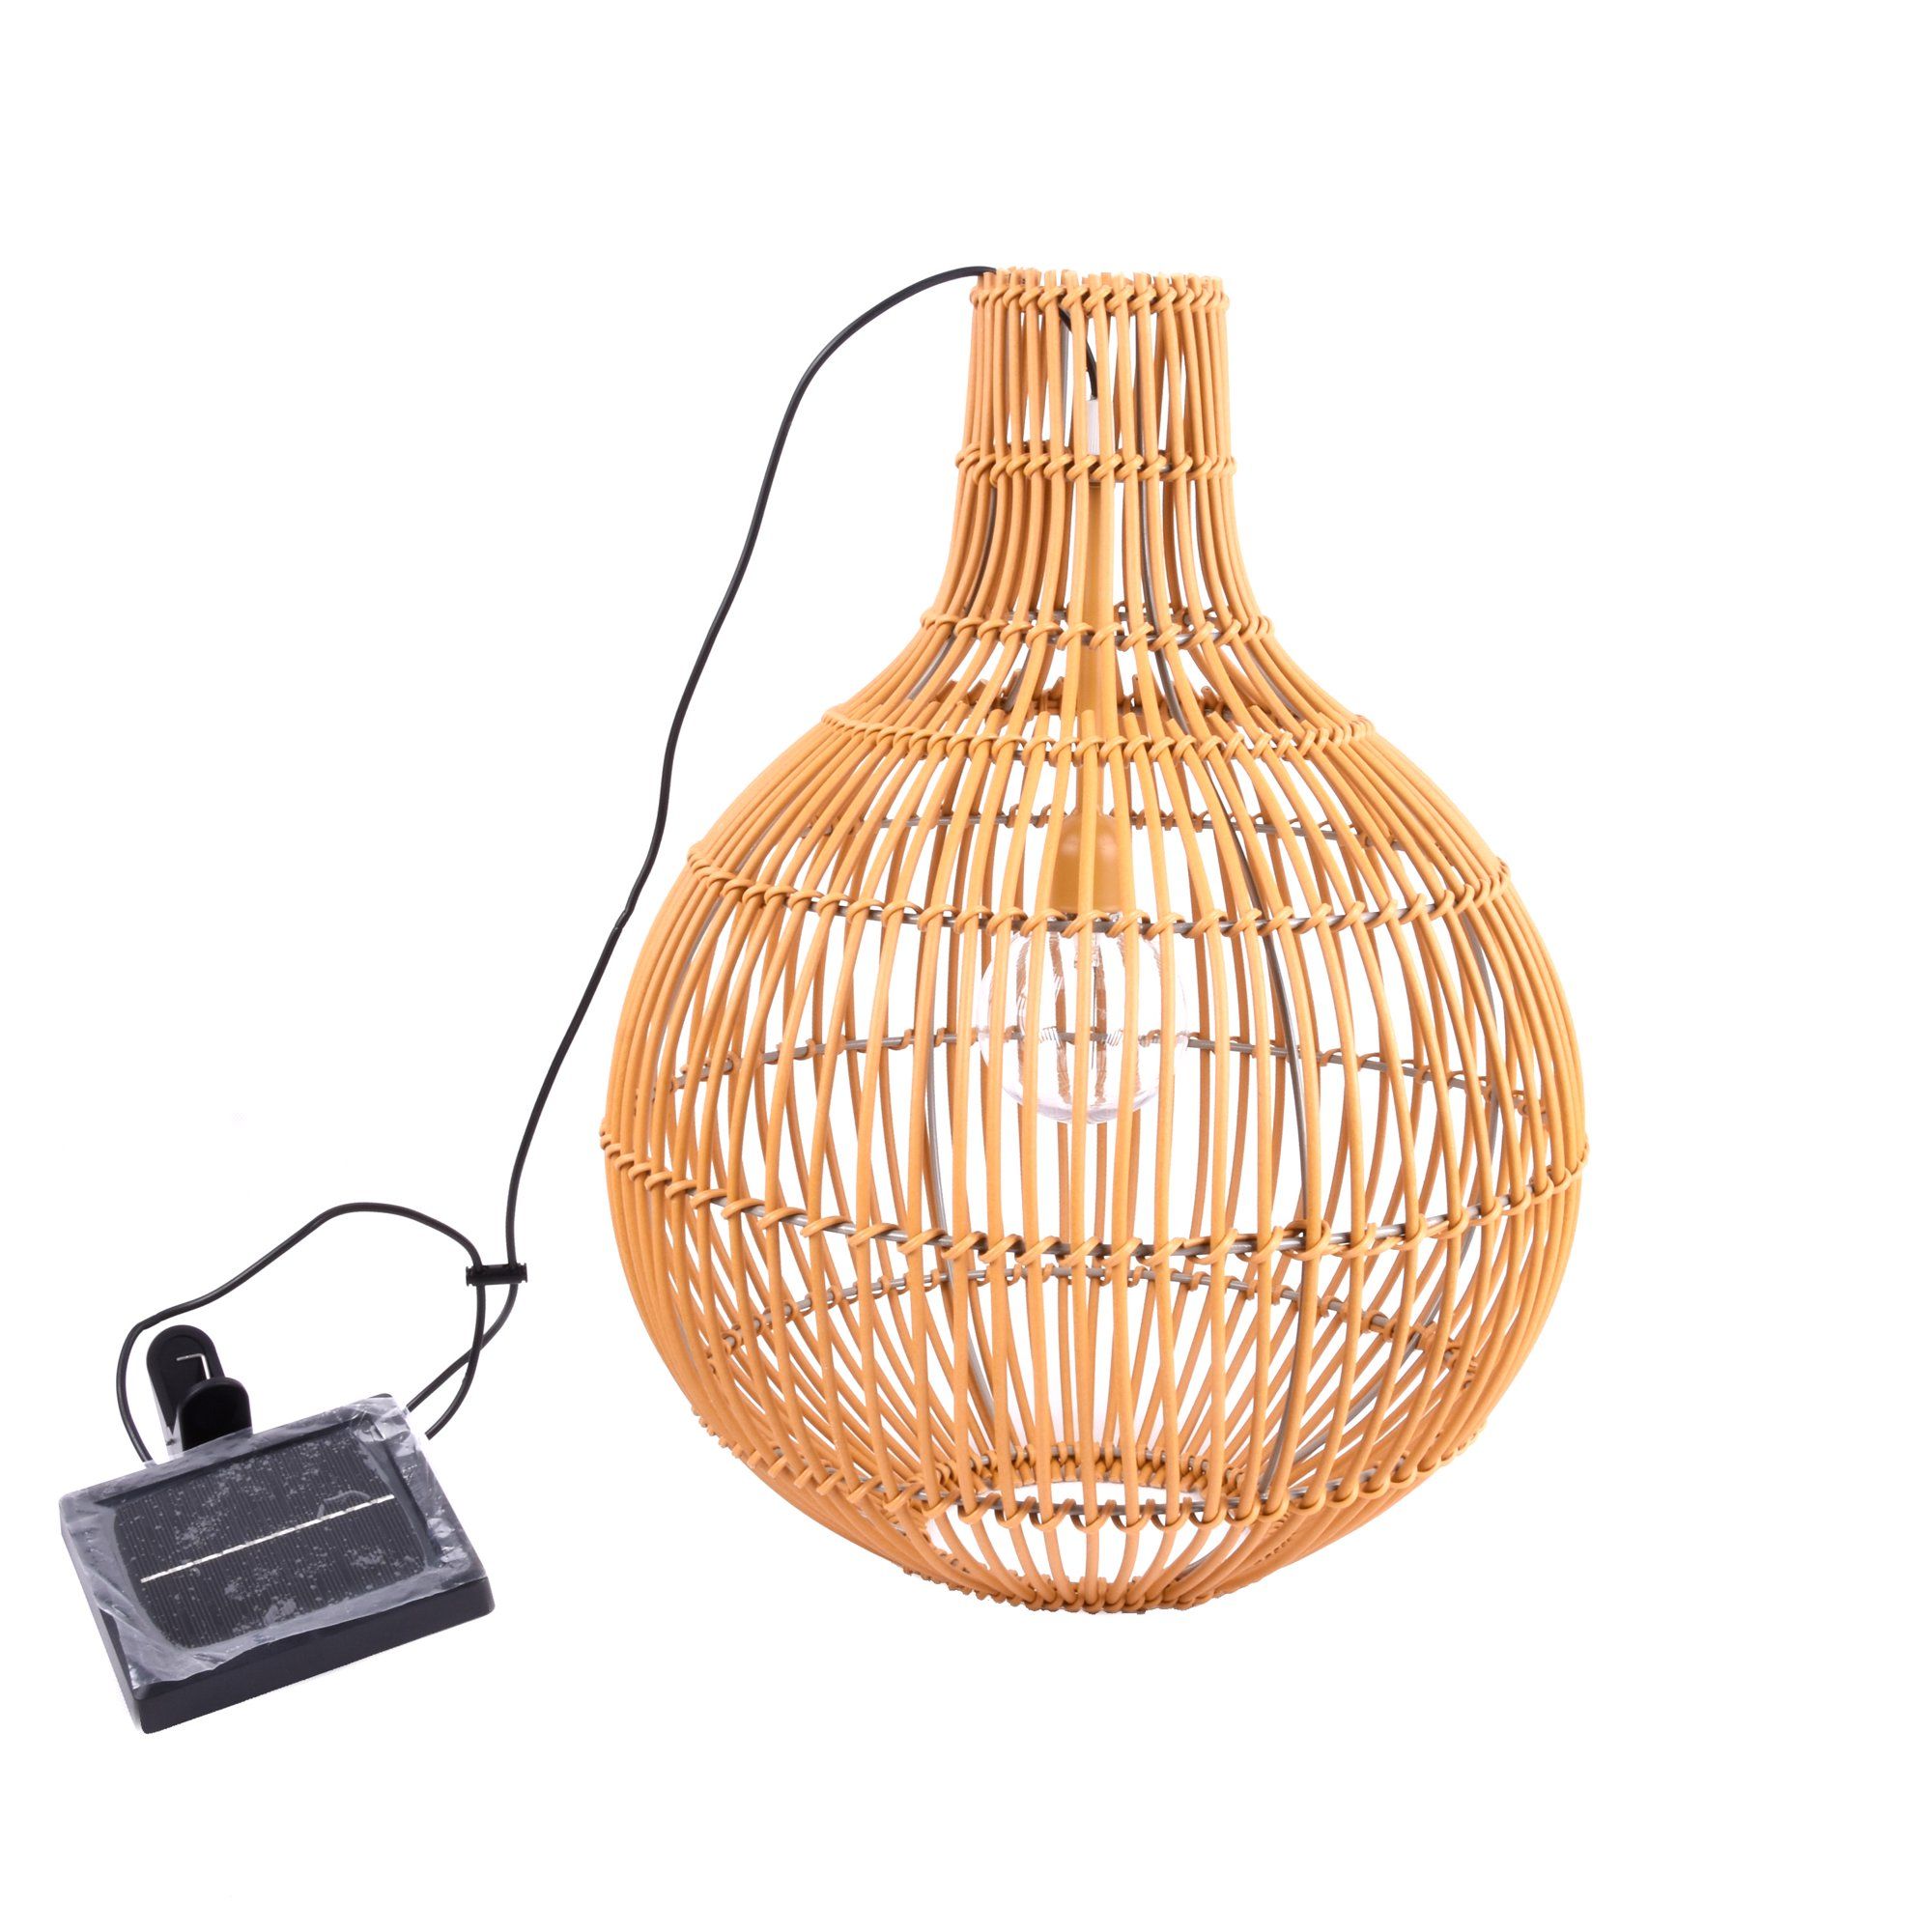 Better Homes and Gardens Vase Shaped Yellow Faux Rattan Solar-powered Lantern. | Walmart (US)